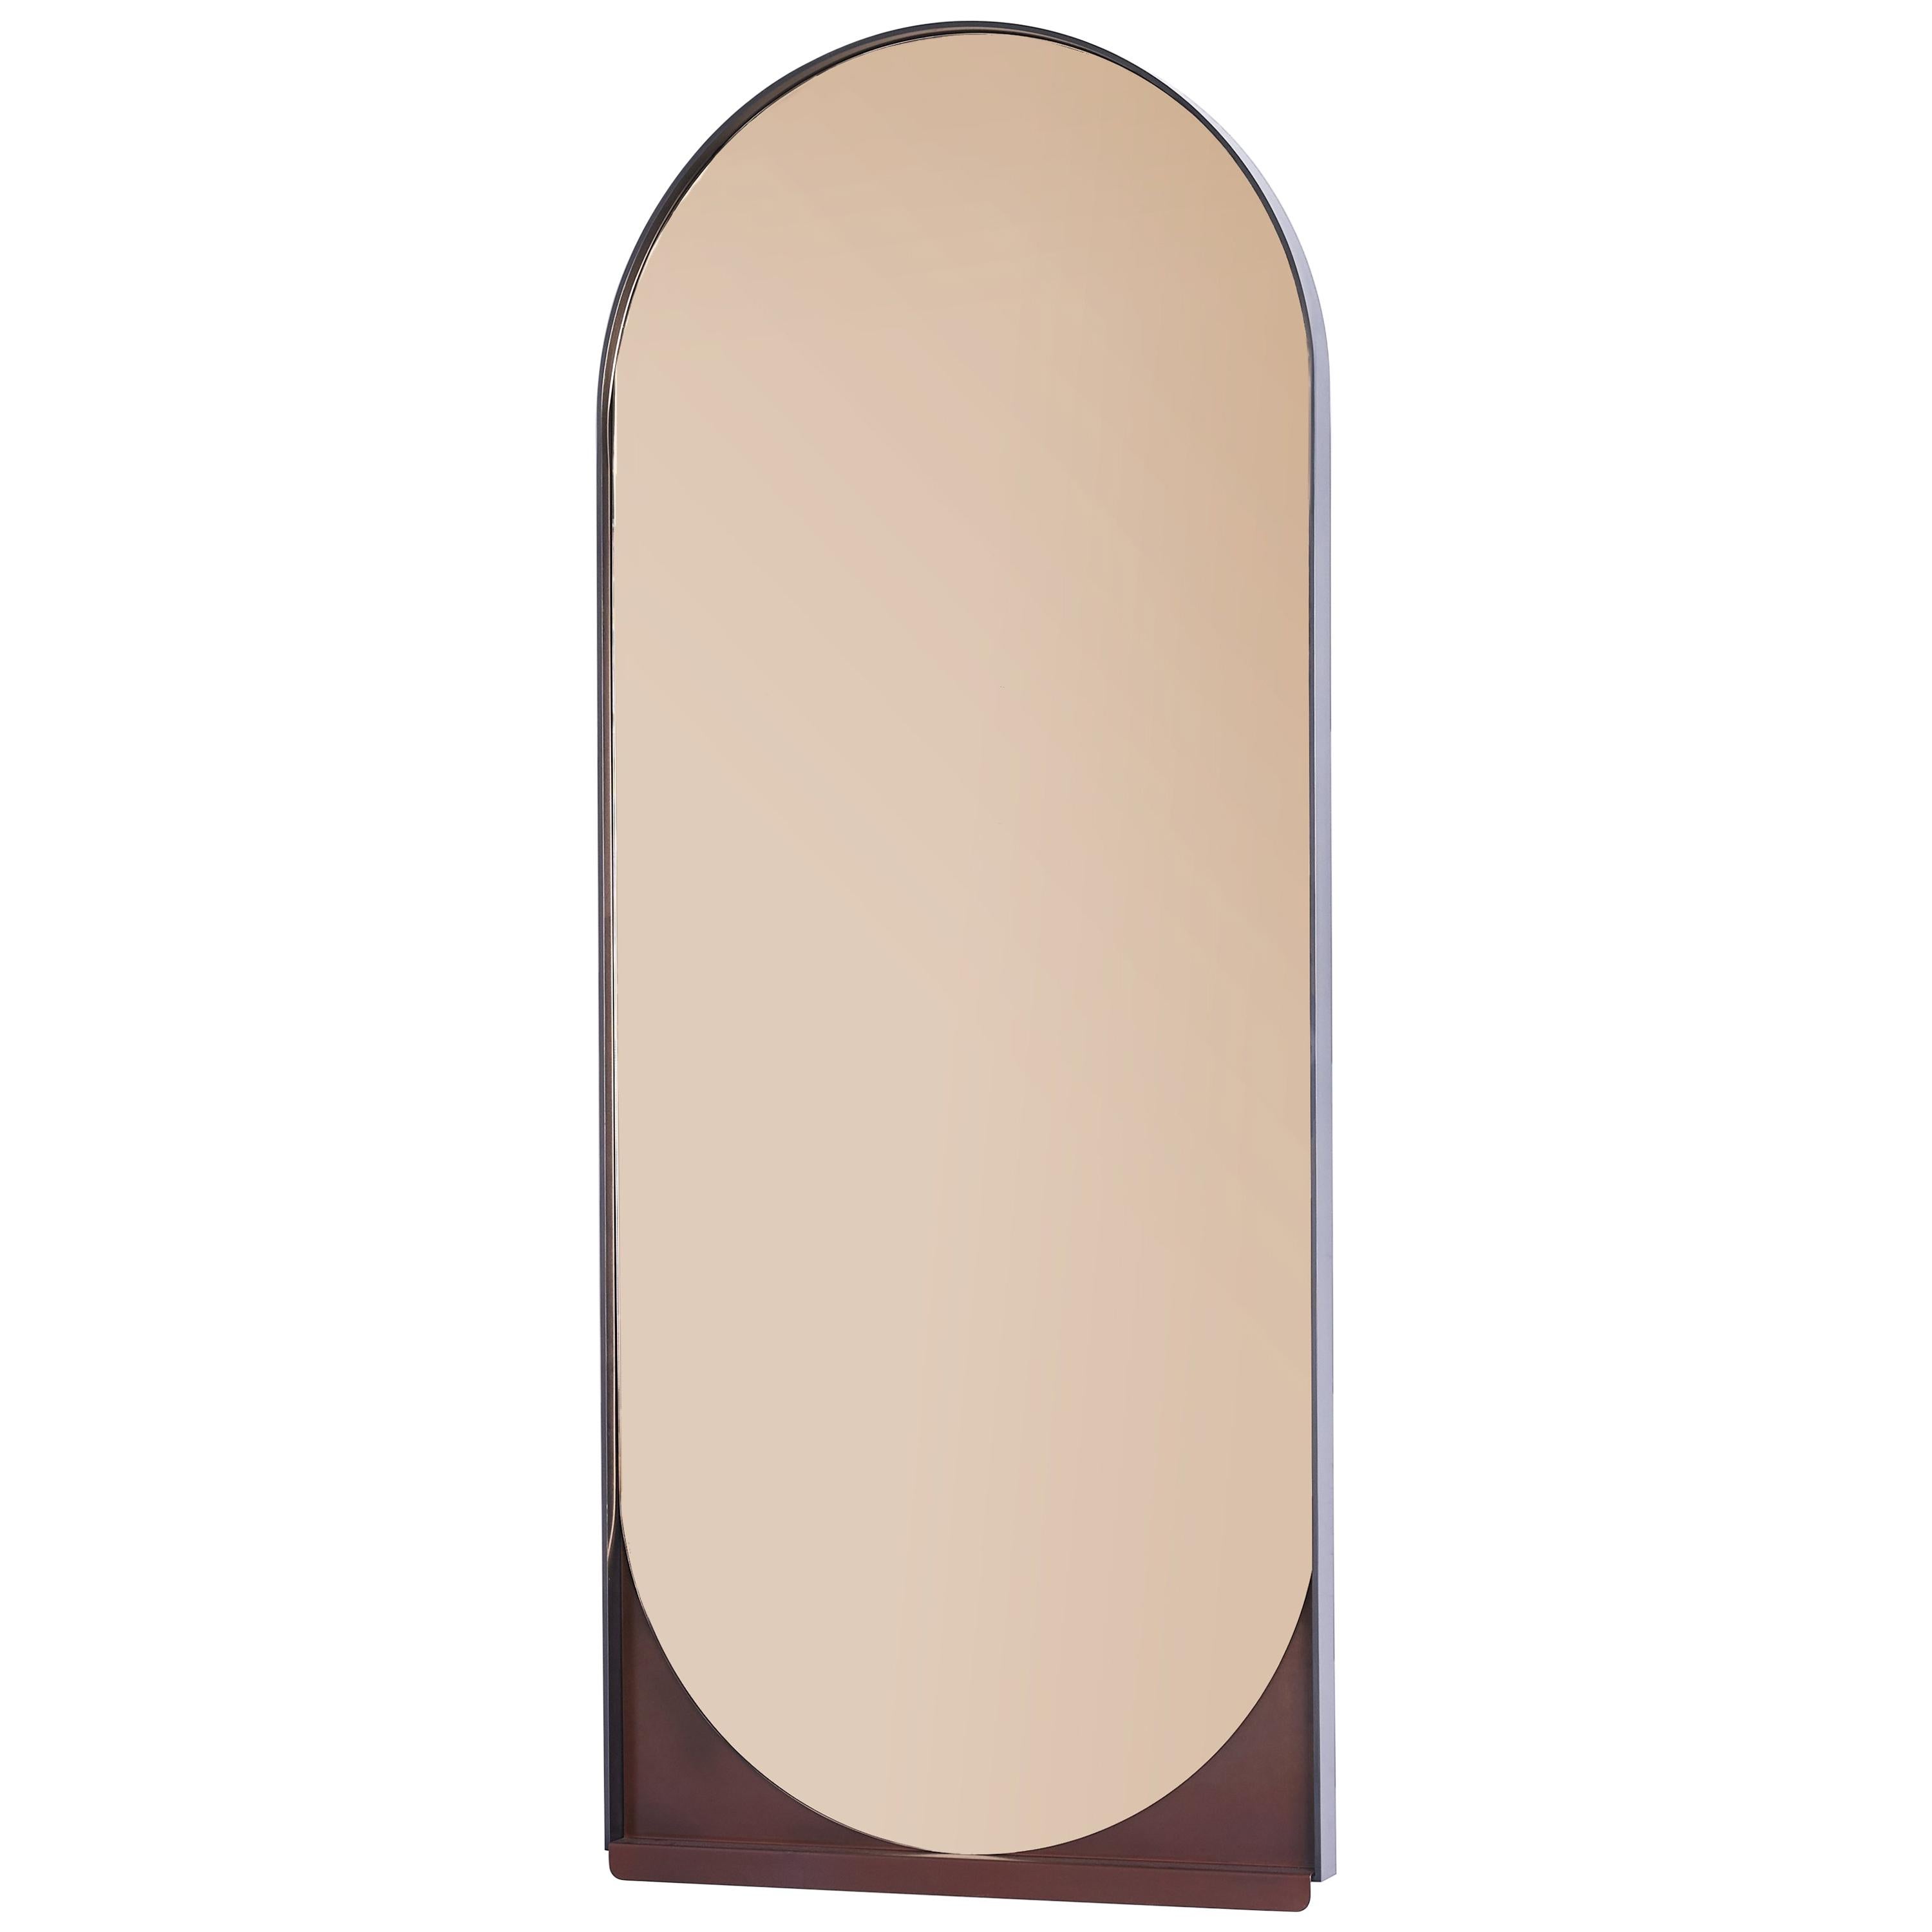 Slip Mirror in Contemporary Blackened Steel, Red Oxide Inlay, and Peach Mirror For Sale